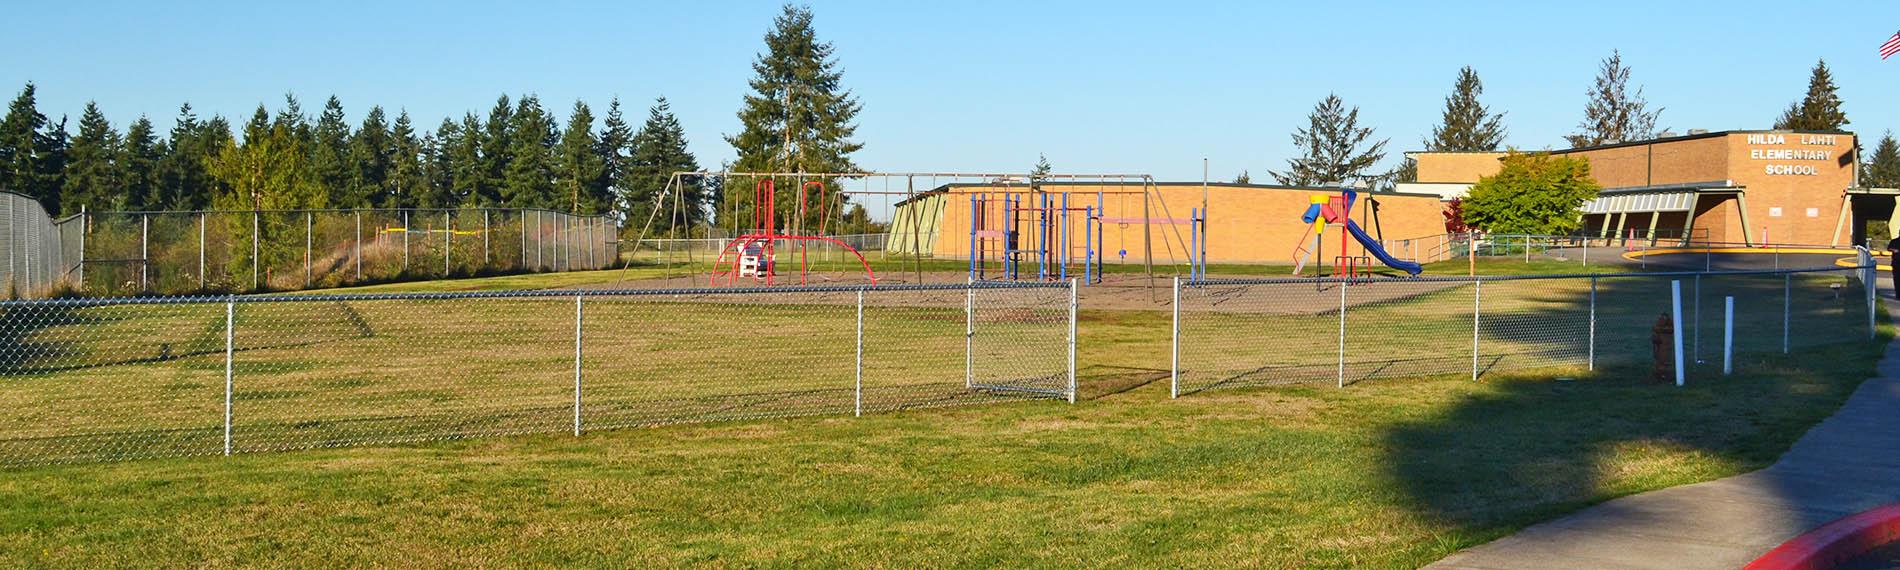 New playground fencing